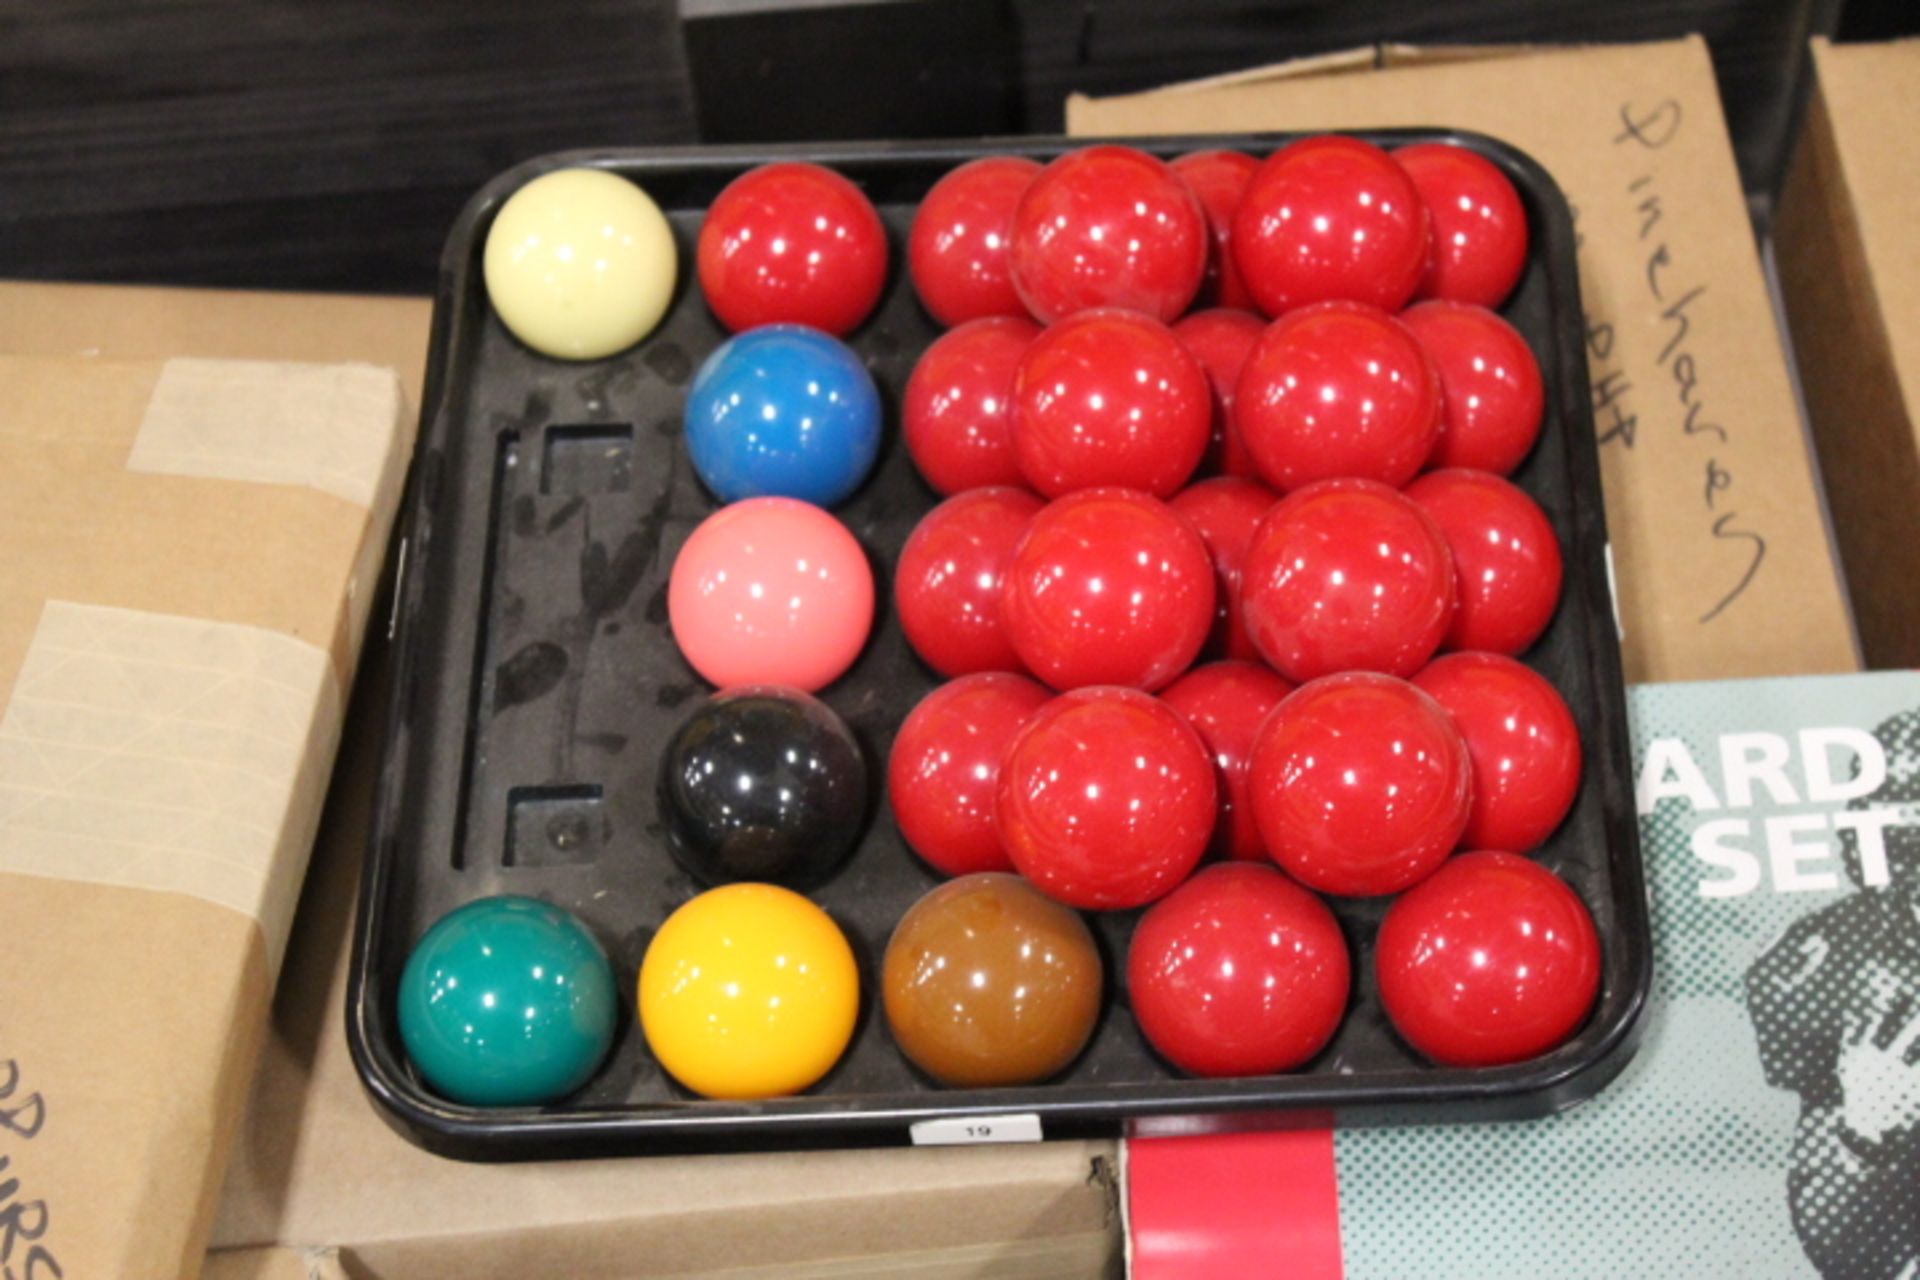 1X, PINEHAVEN 7' POOL TABLE (NO CLOTH, OR CUES), COMES WITH SOME BALLS - Image 5 of 6